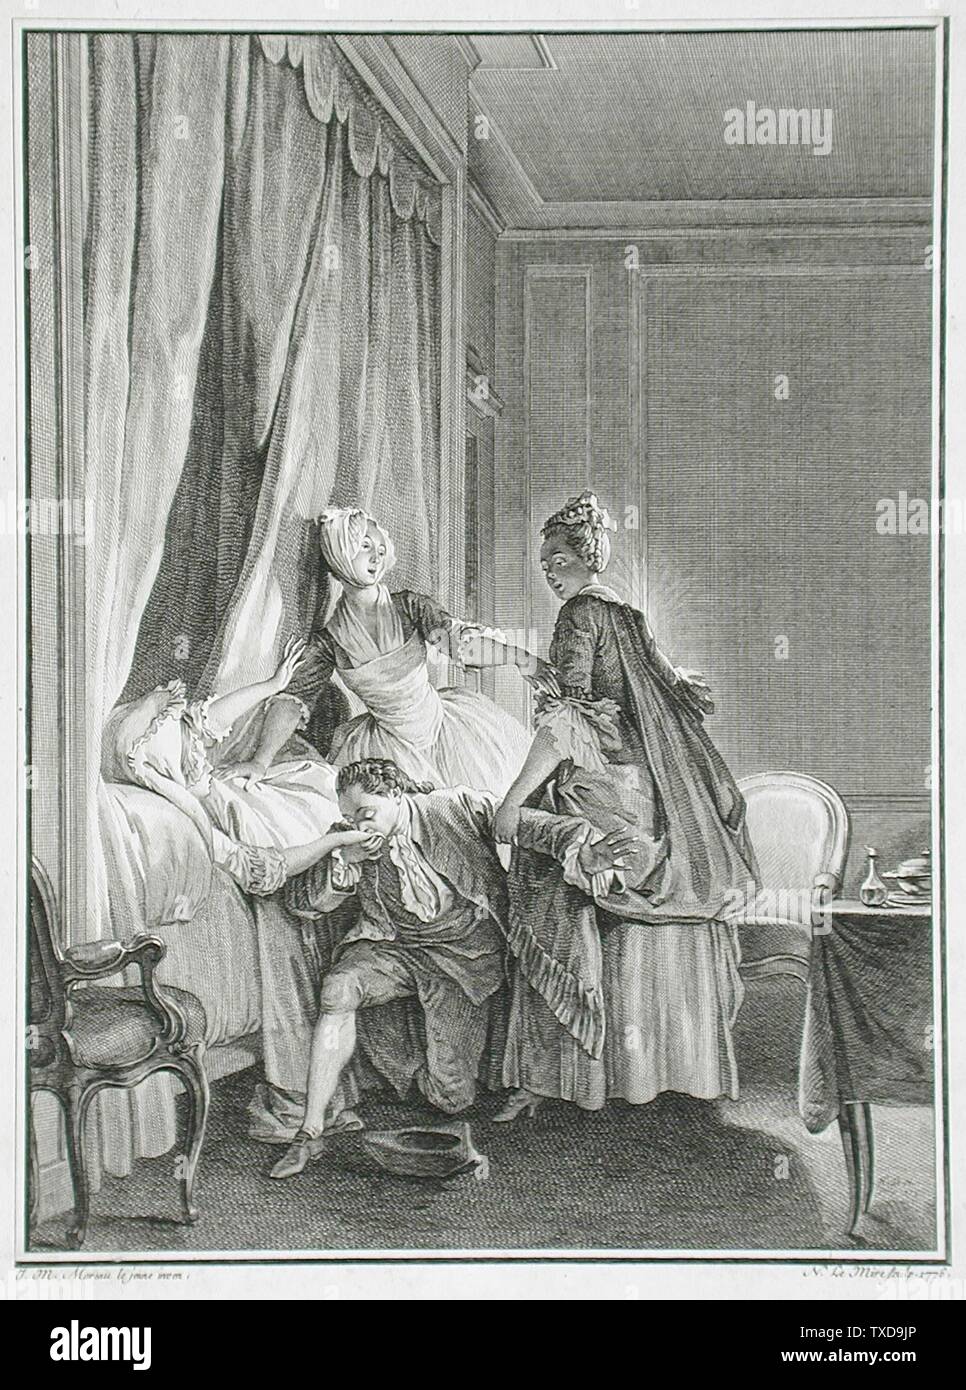 The Innoculation of Love;  France, 1776 Alternate L'Inoculation de l'amour Book: Rousseau's Nouvelle HÃ©loÃ¯se Prints; engravings Engraving Gift of Mrs. Mary B. Regan (31.21.182) Prints and Drawings; 1776date QS:P571,+1776-00-00T00:00:00Z/9; Stock Photo